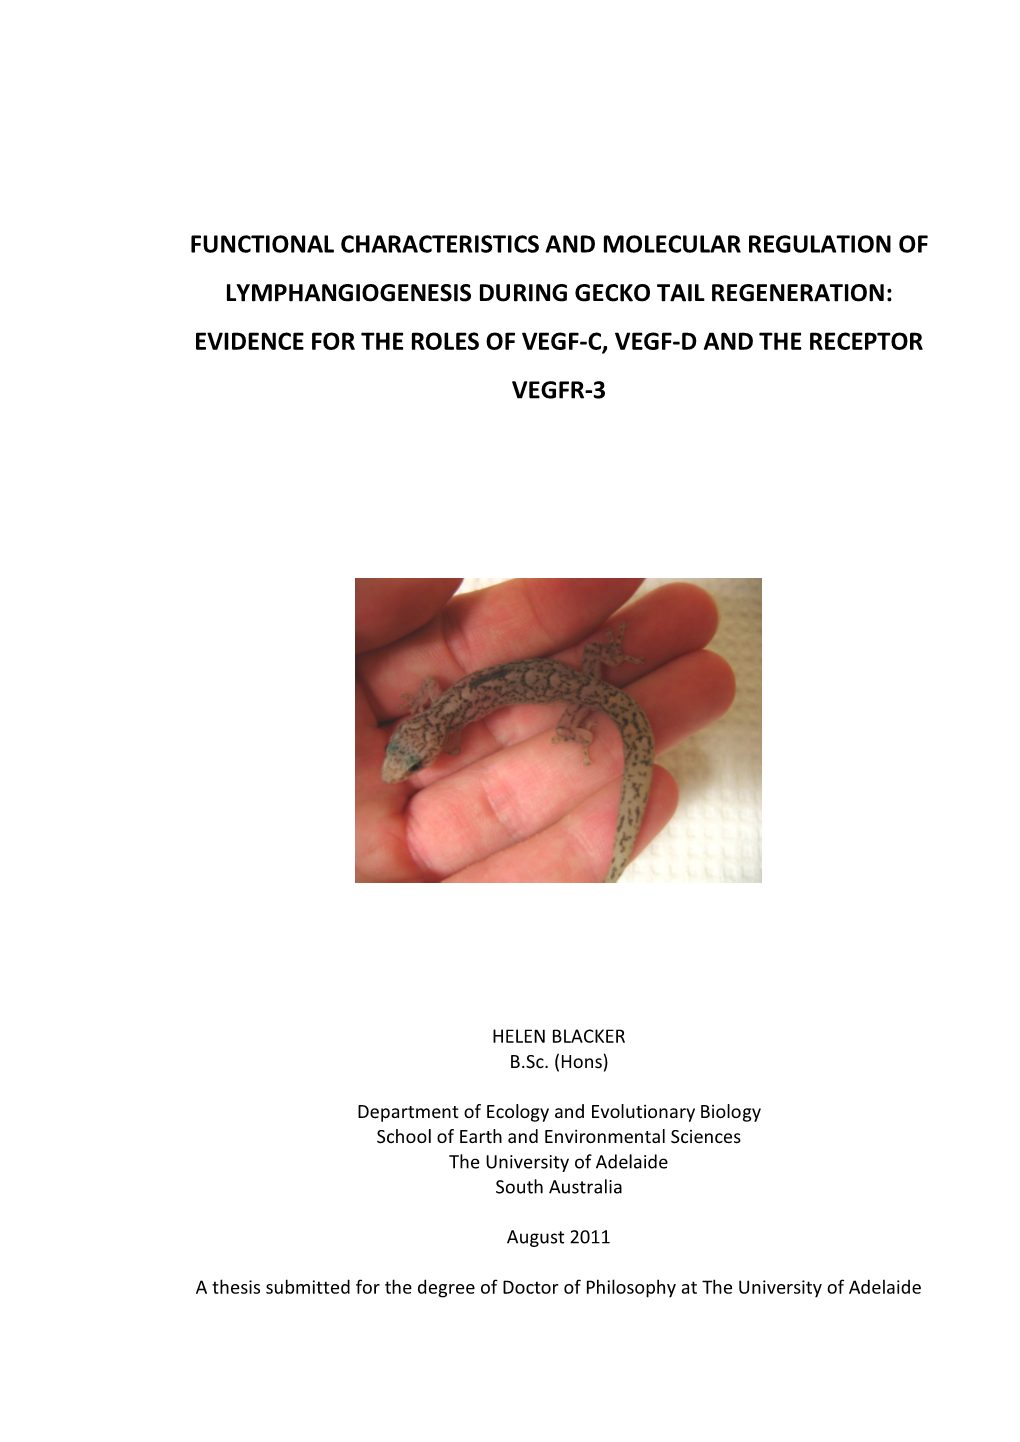 Chapter One INSIGHTS INTO LYMPHANGIOGENESIS and LIZARD TAIL REGENERATION